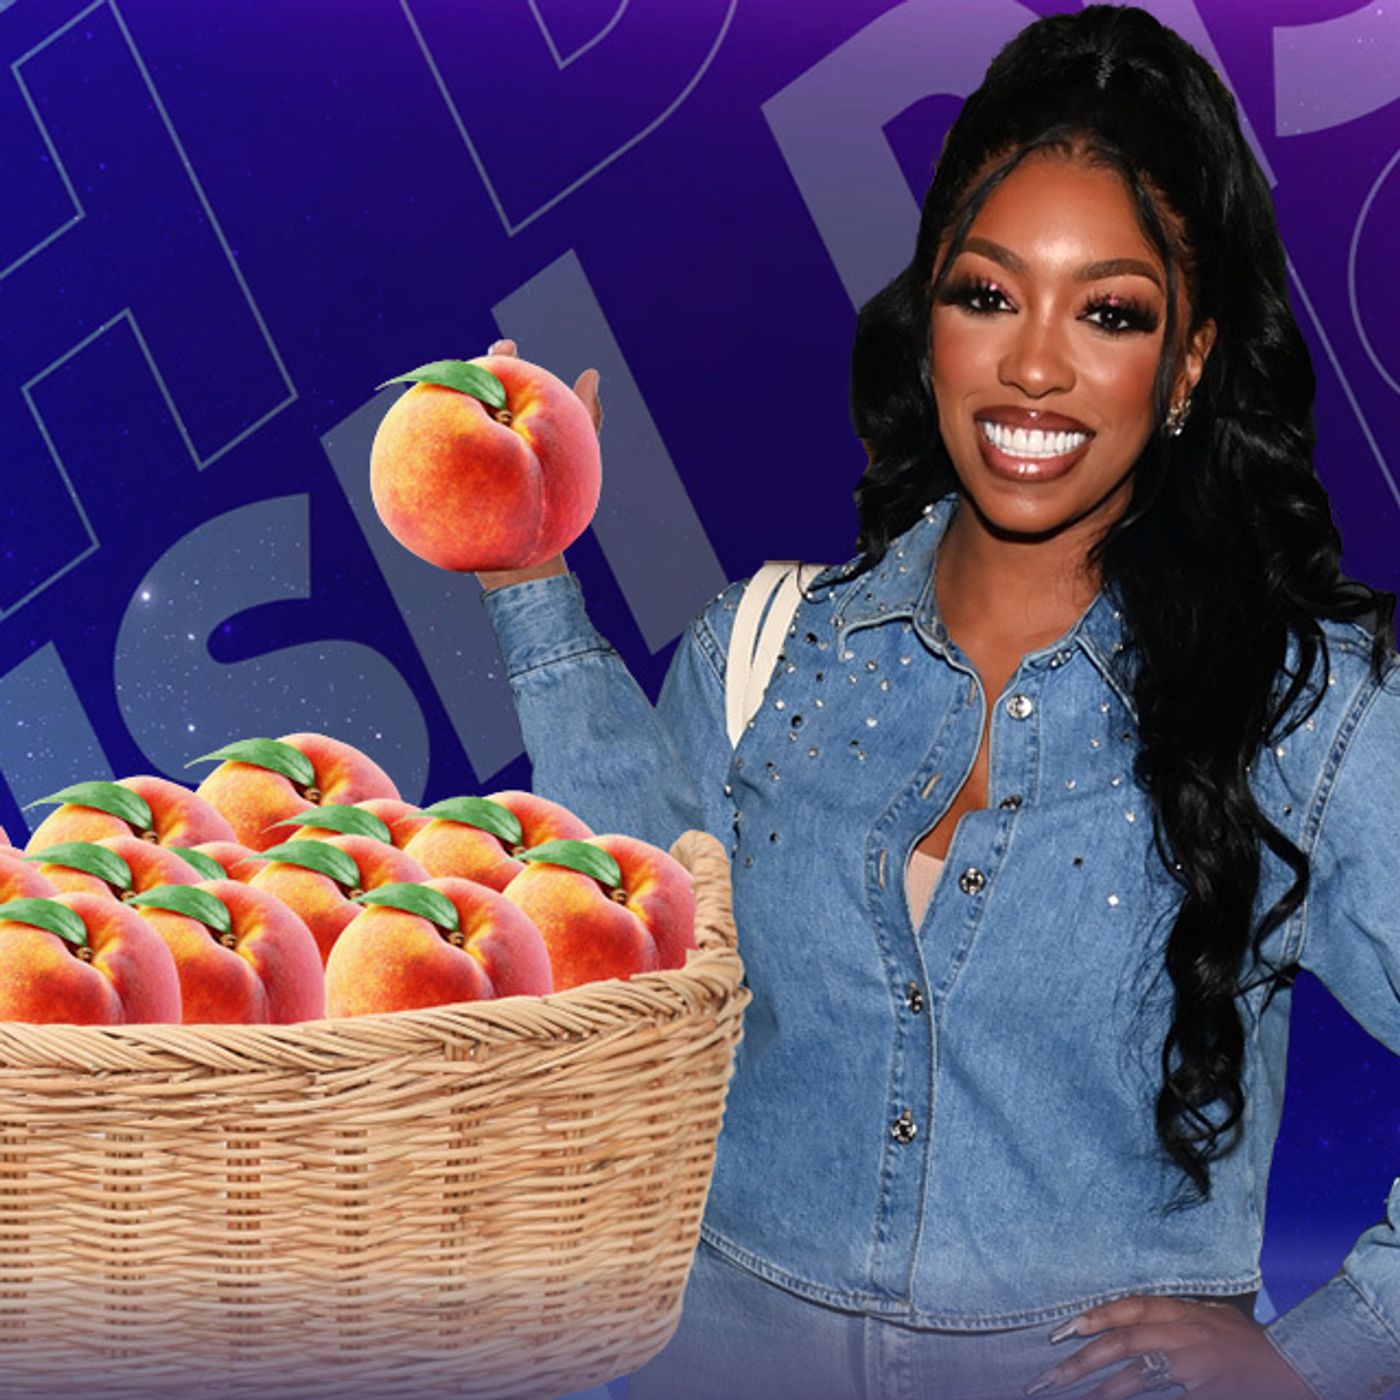 S12 Ep112: 02/06/24 - Porsha Reportedly Returning To 'RHOA' & A Justin Timberlake Tell-All with Oprah?